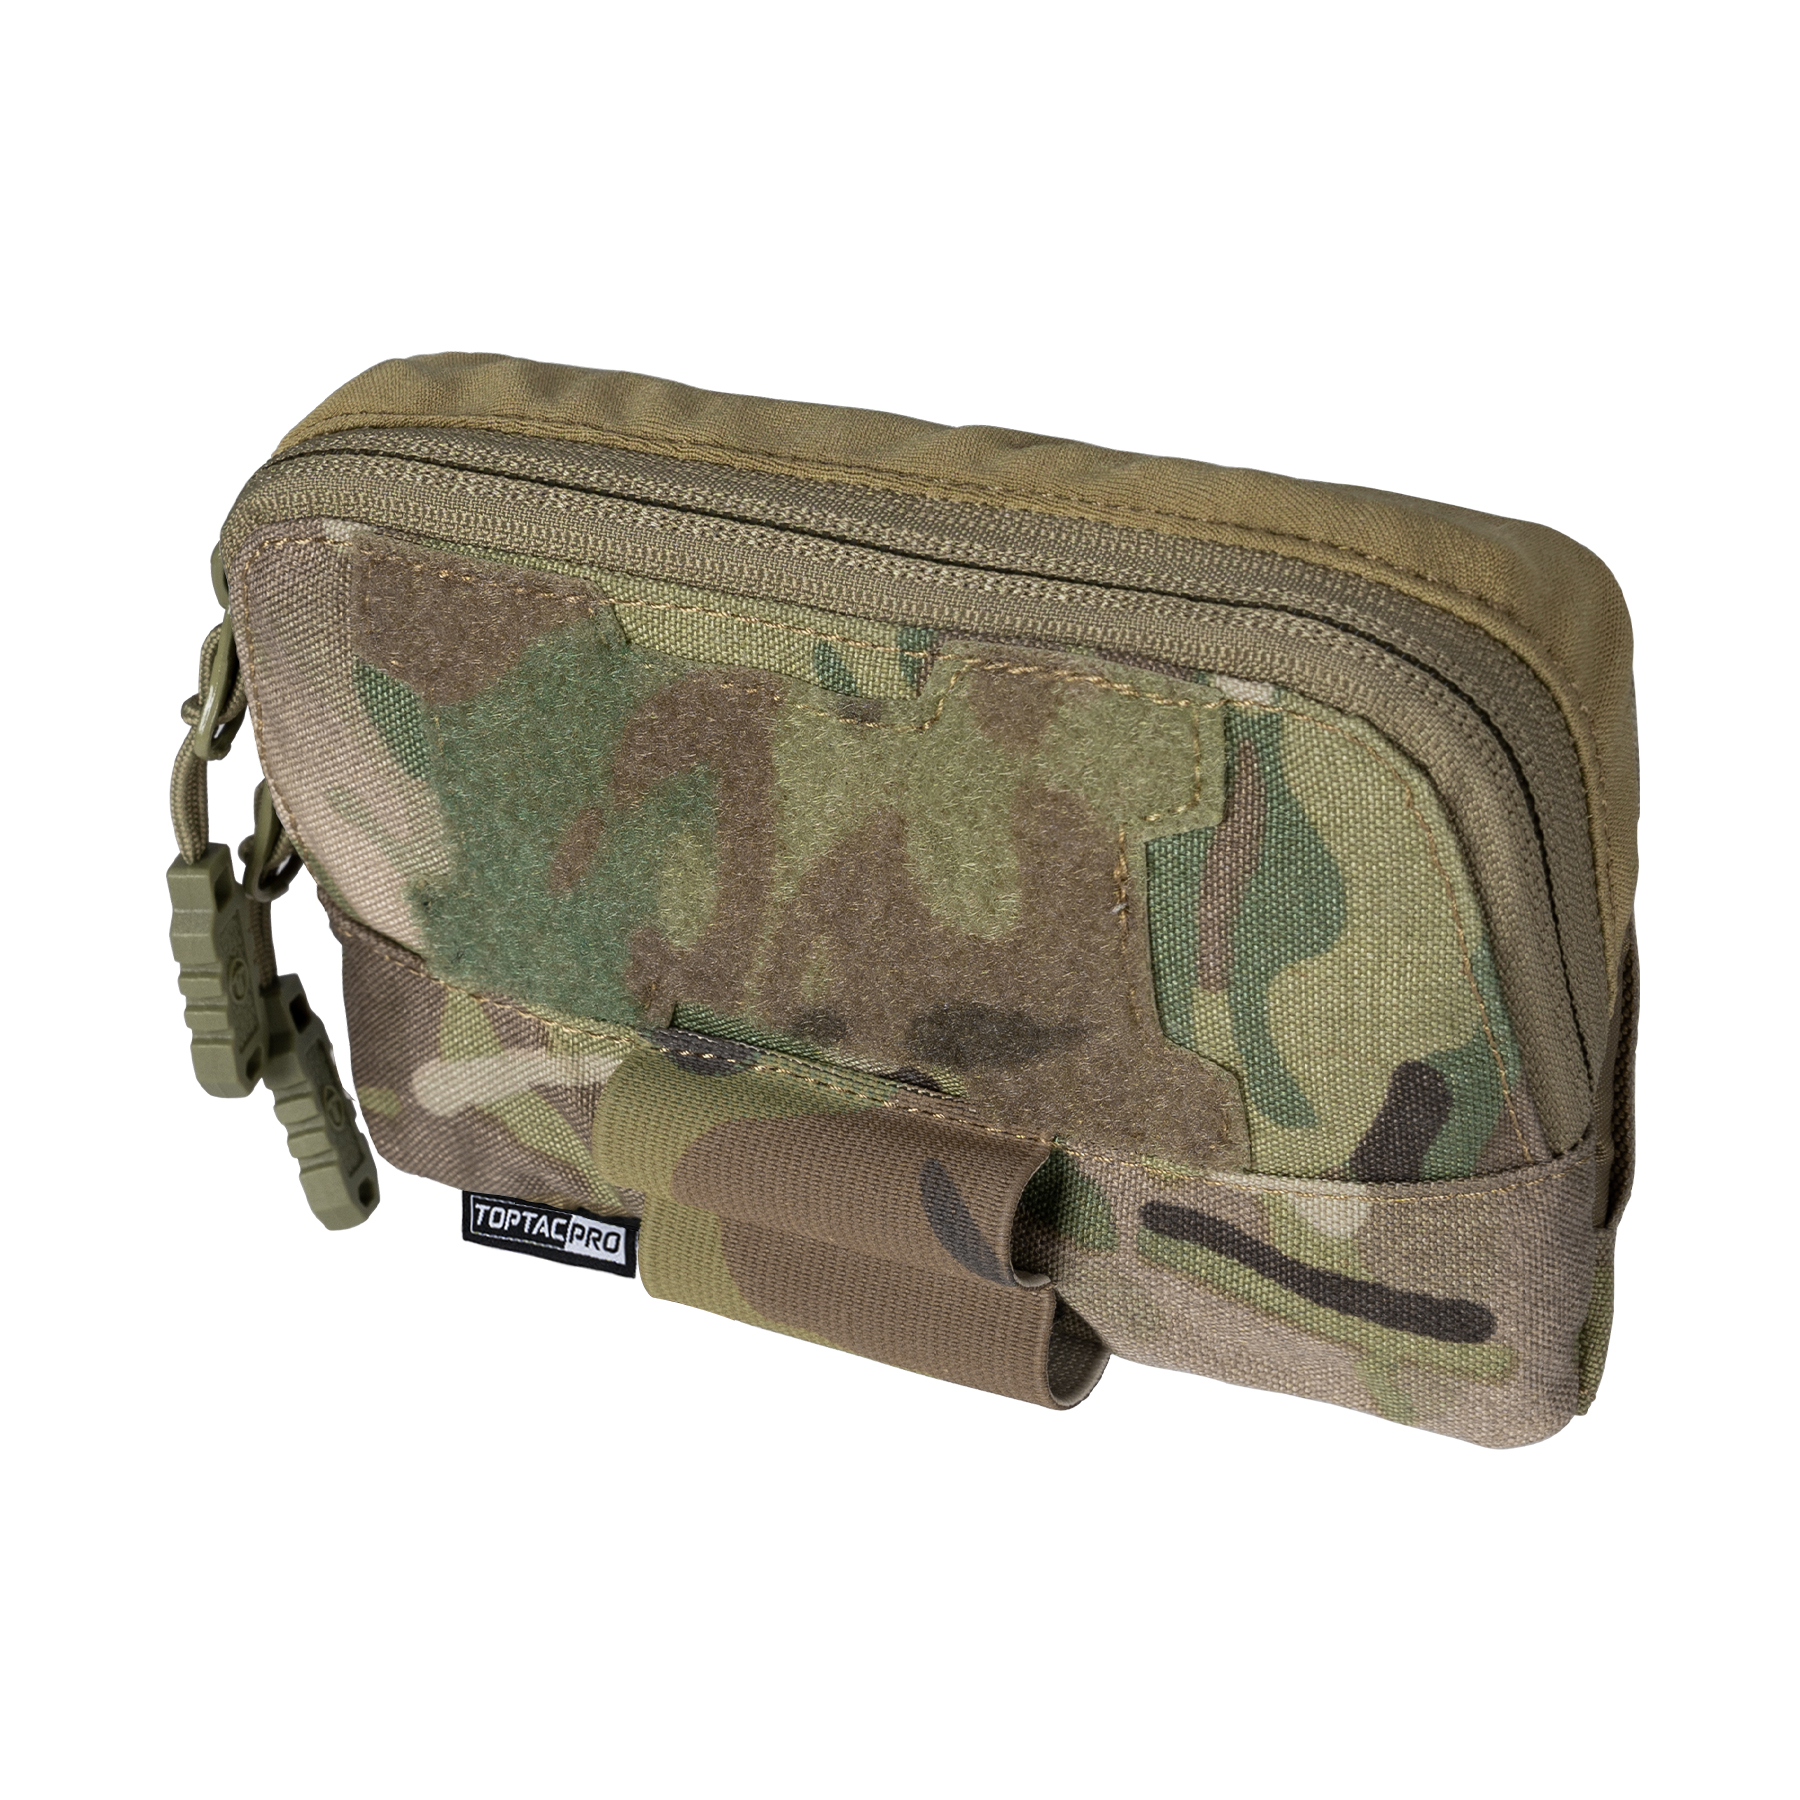 TOPTACPRO Tactical MOLLE Admin Panel Pouch Small Chest Pouch For Tactical Vest JPC2.0 AVS CPC MOLLE System Gun Belt 8510